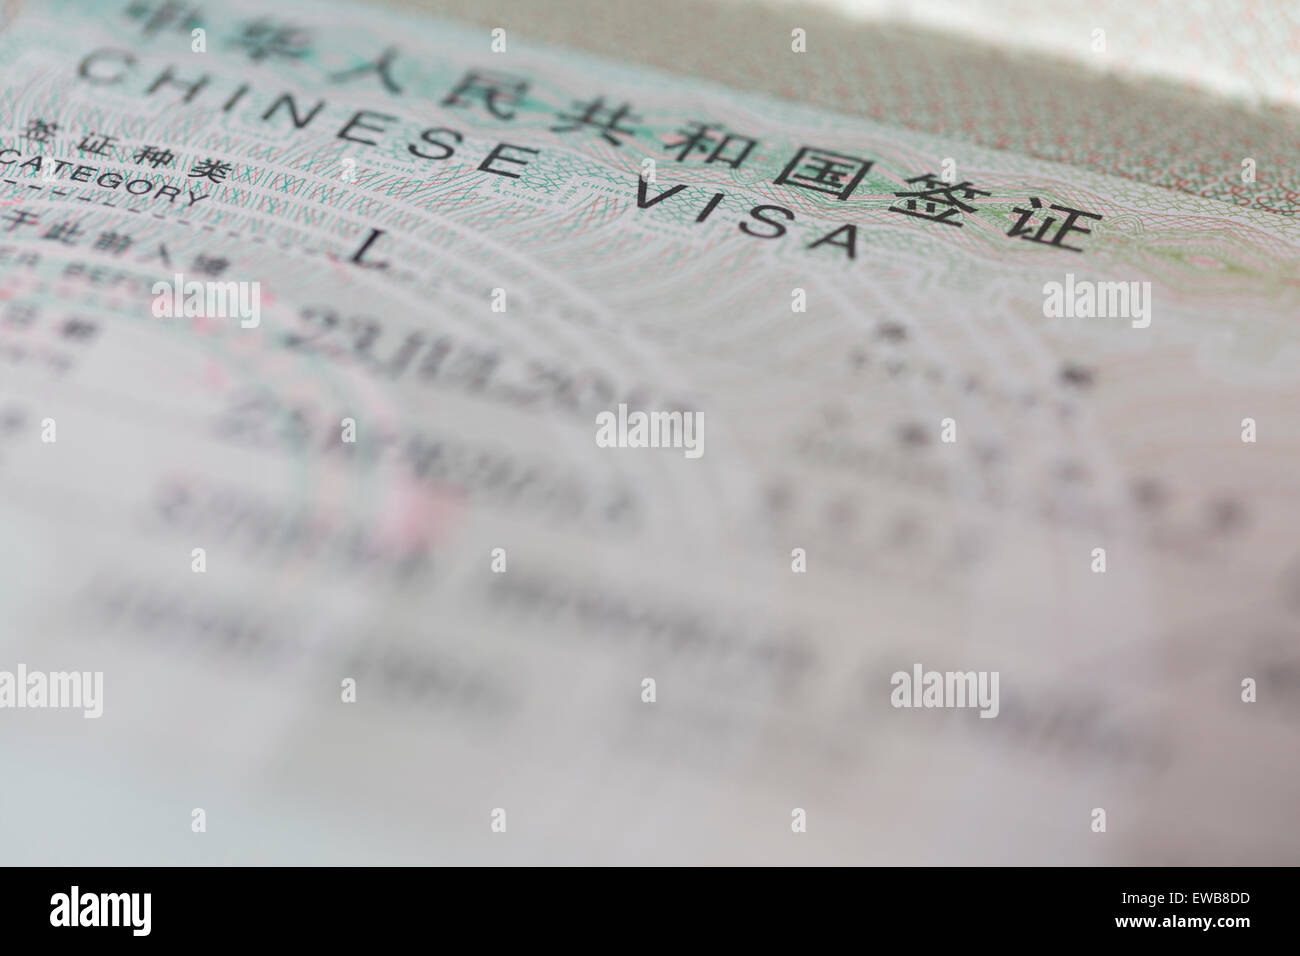 Close up view of a Chinise Visa for Tourist in a Passport Stock Photo